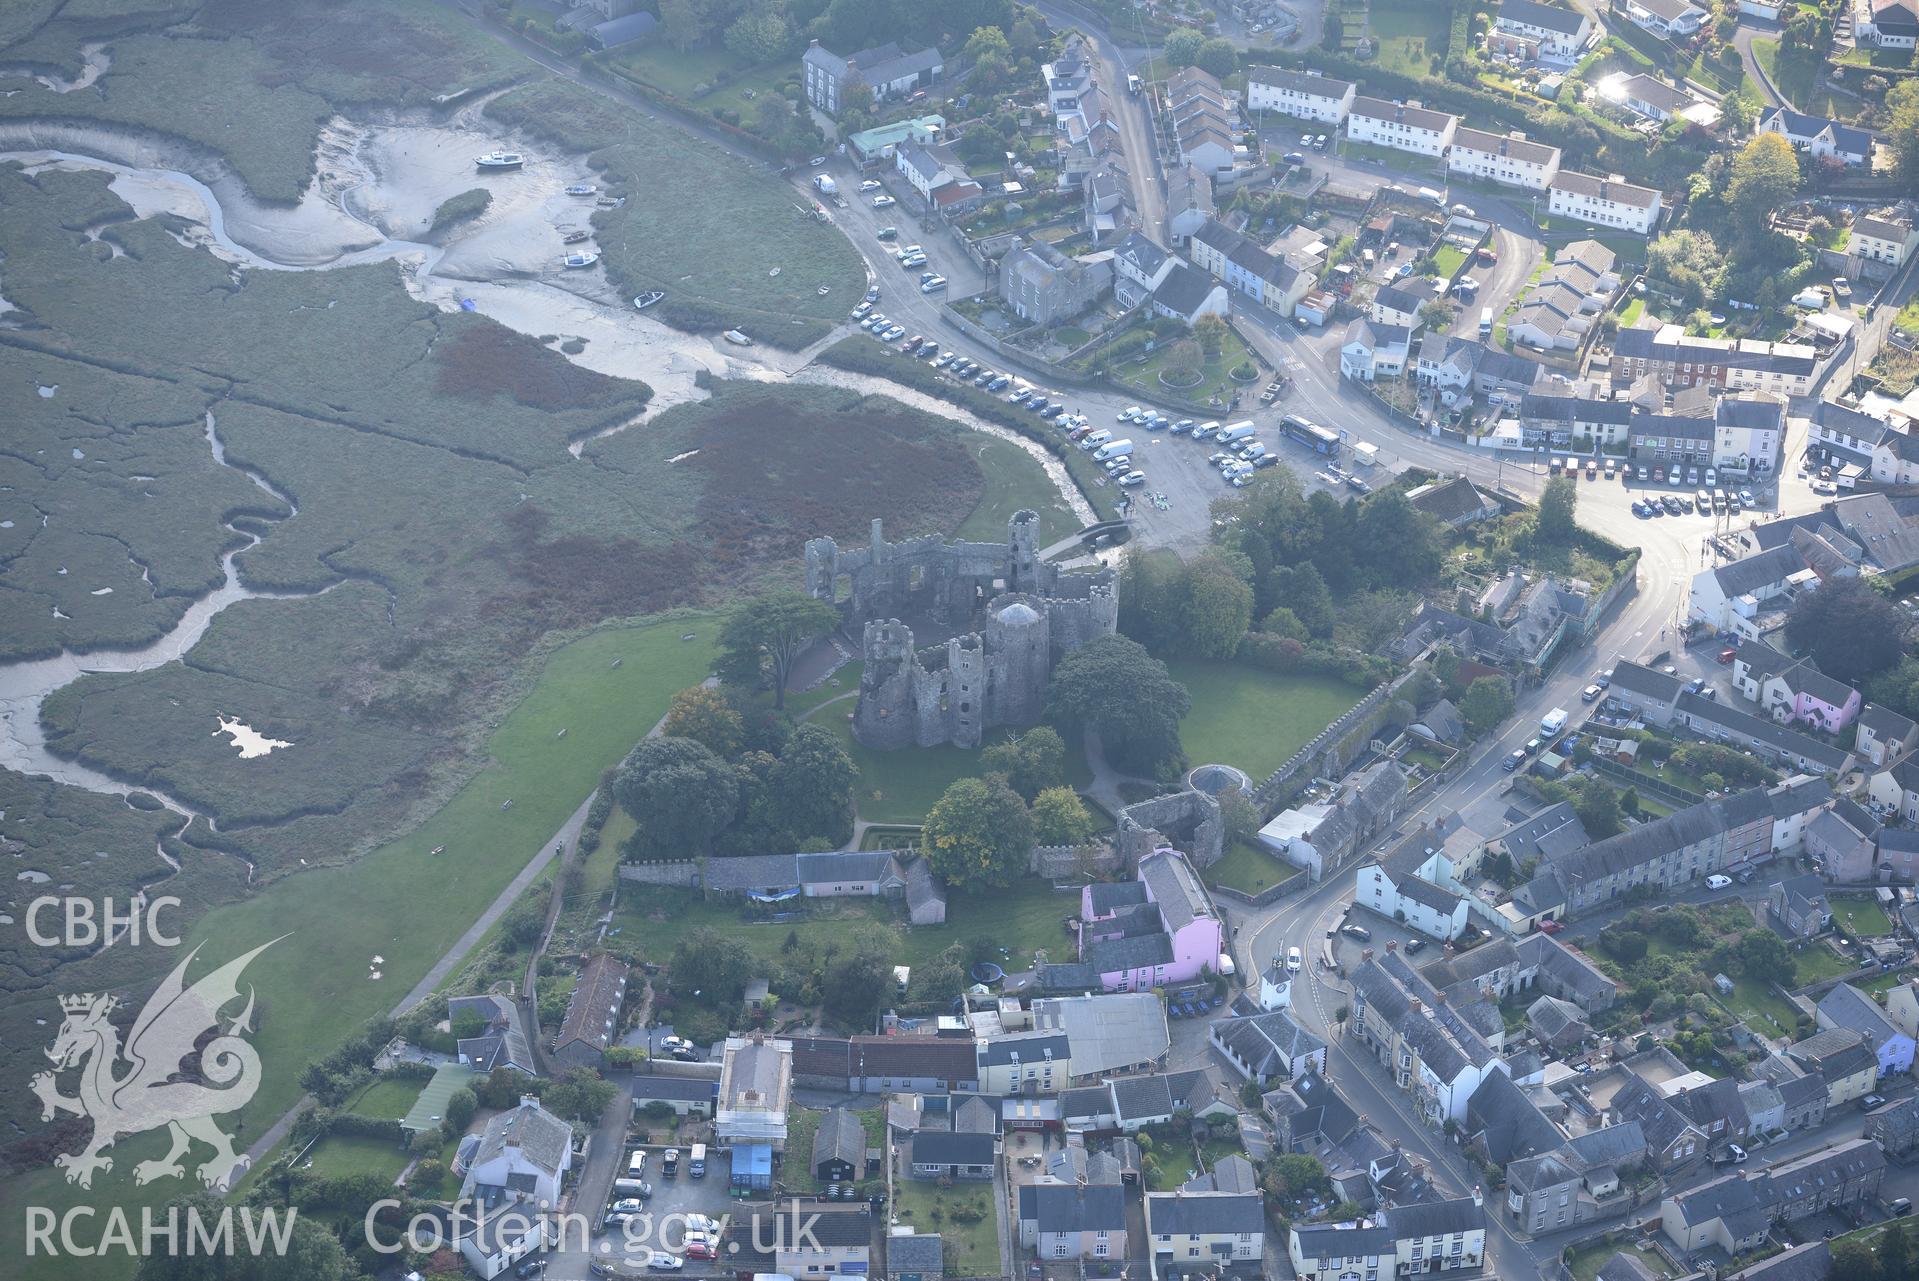 Laugharne Castle, Castle House and the surrounding town. Oblique aerial photograph taken during Royal Commission's programme of archaeological aerial reconnaissance by Toby Driver on 30th September 2015.